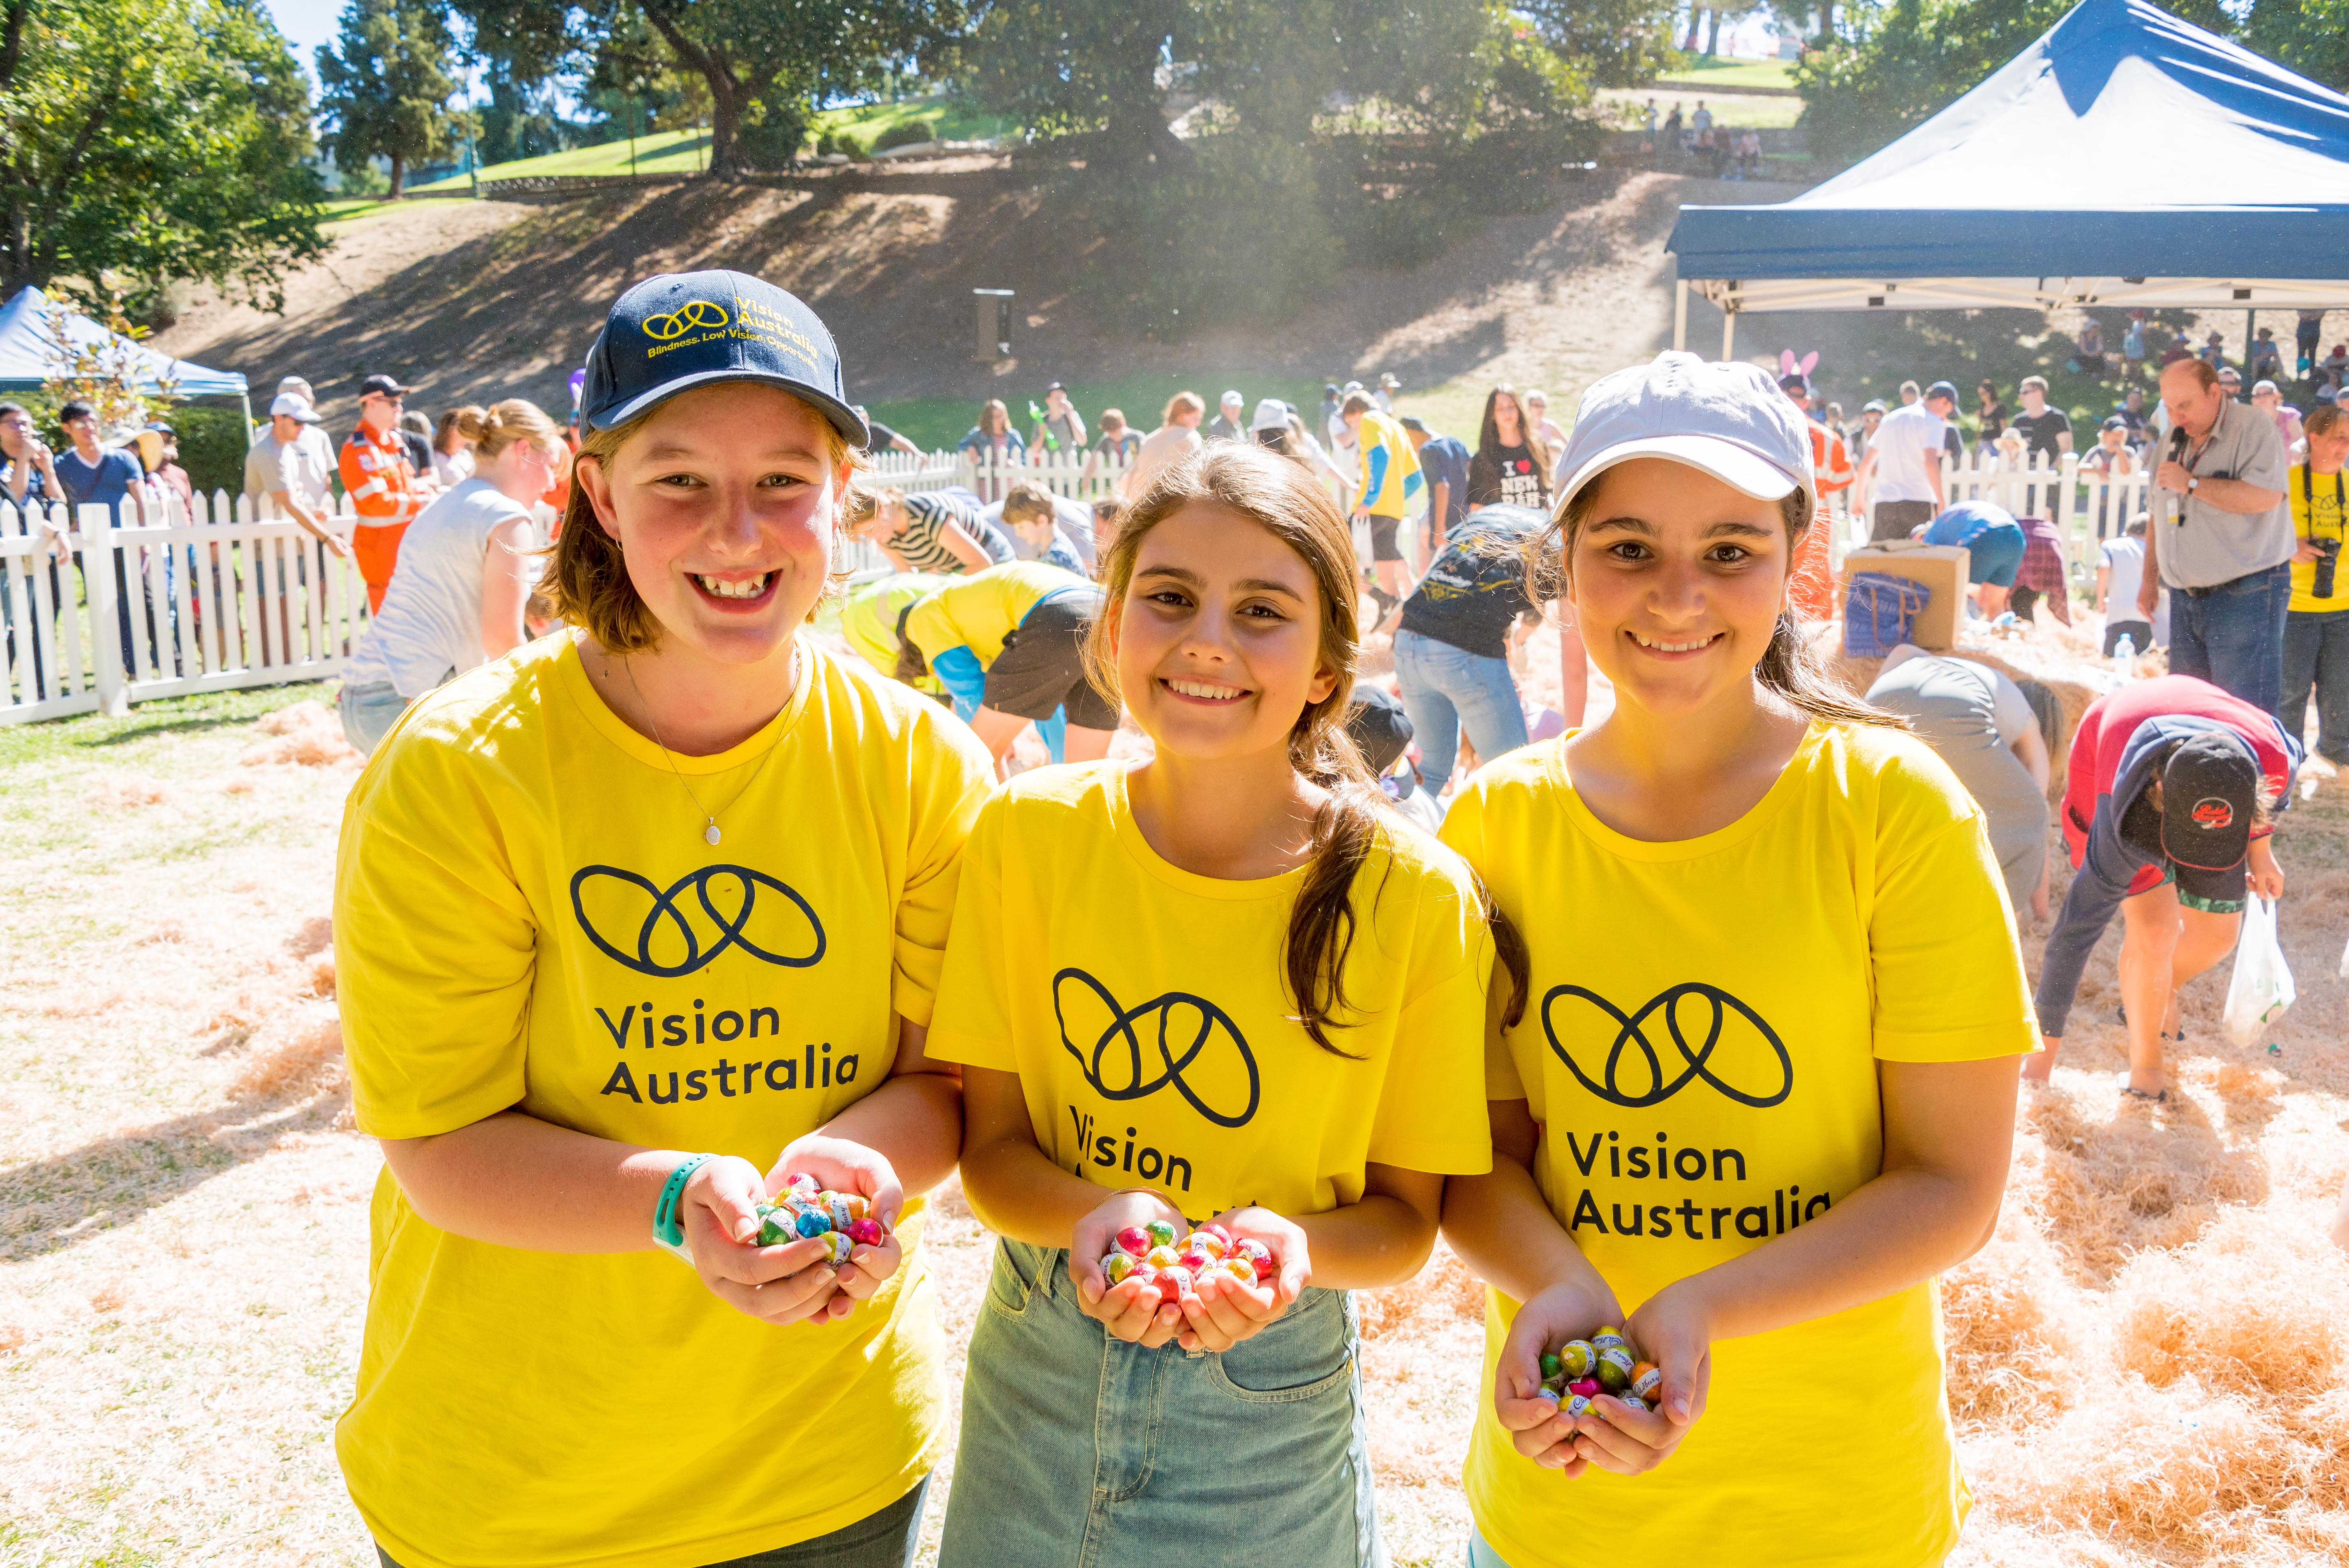 "Three volunteers in Vision Australia branded t-shirts each holding a handful of Easter eggs"